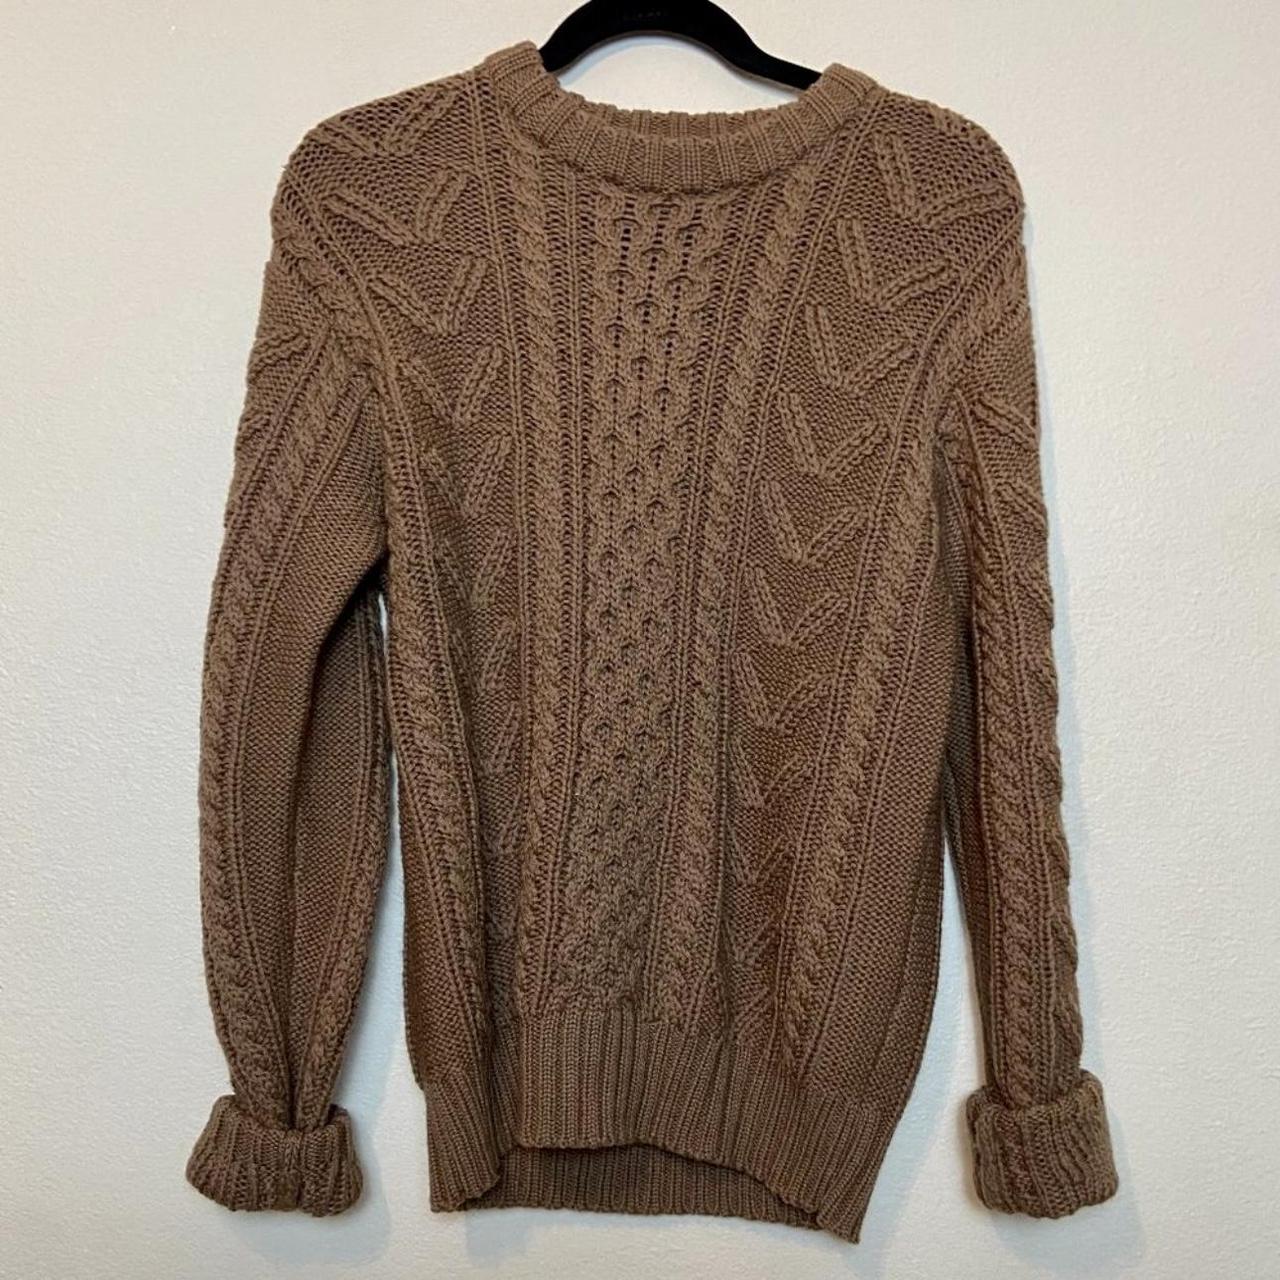 Vintage Equipment Cable Knit Braided Wool Sweater in... - Depop